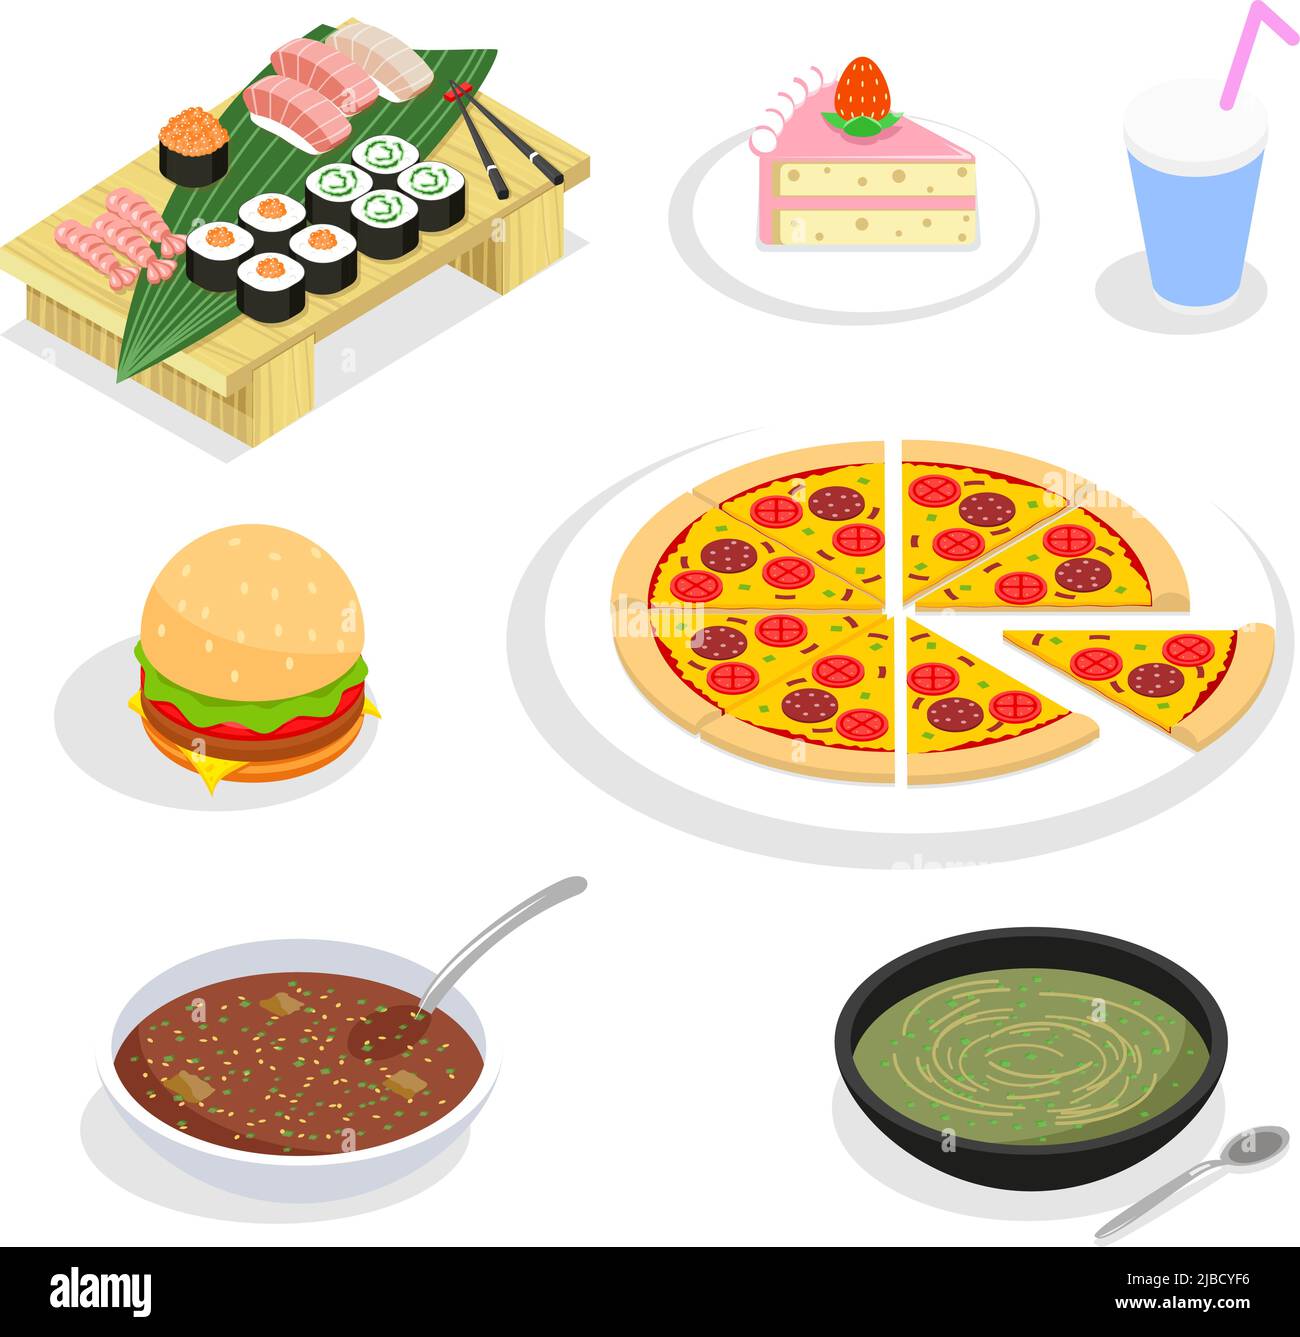 Food isometric icons. Hamburgers and sushi, cake and pizza. Restaurant and meat, lunch and menu, vector illustration Stock Vector